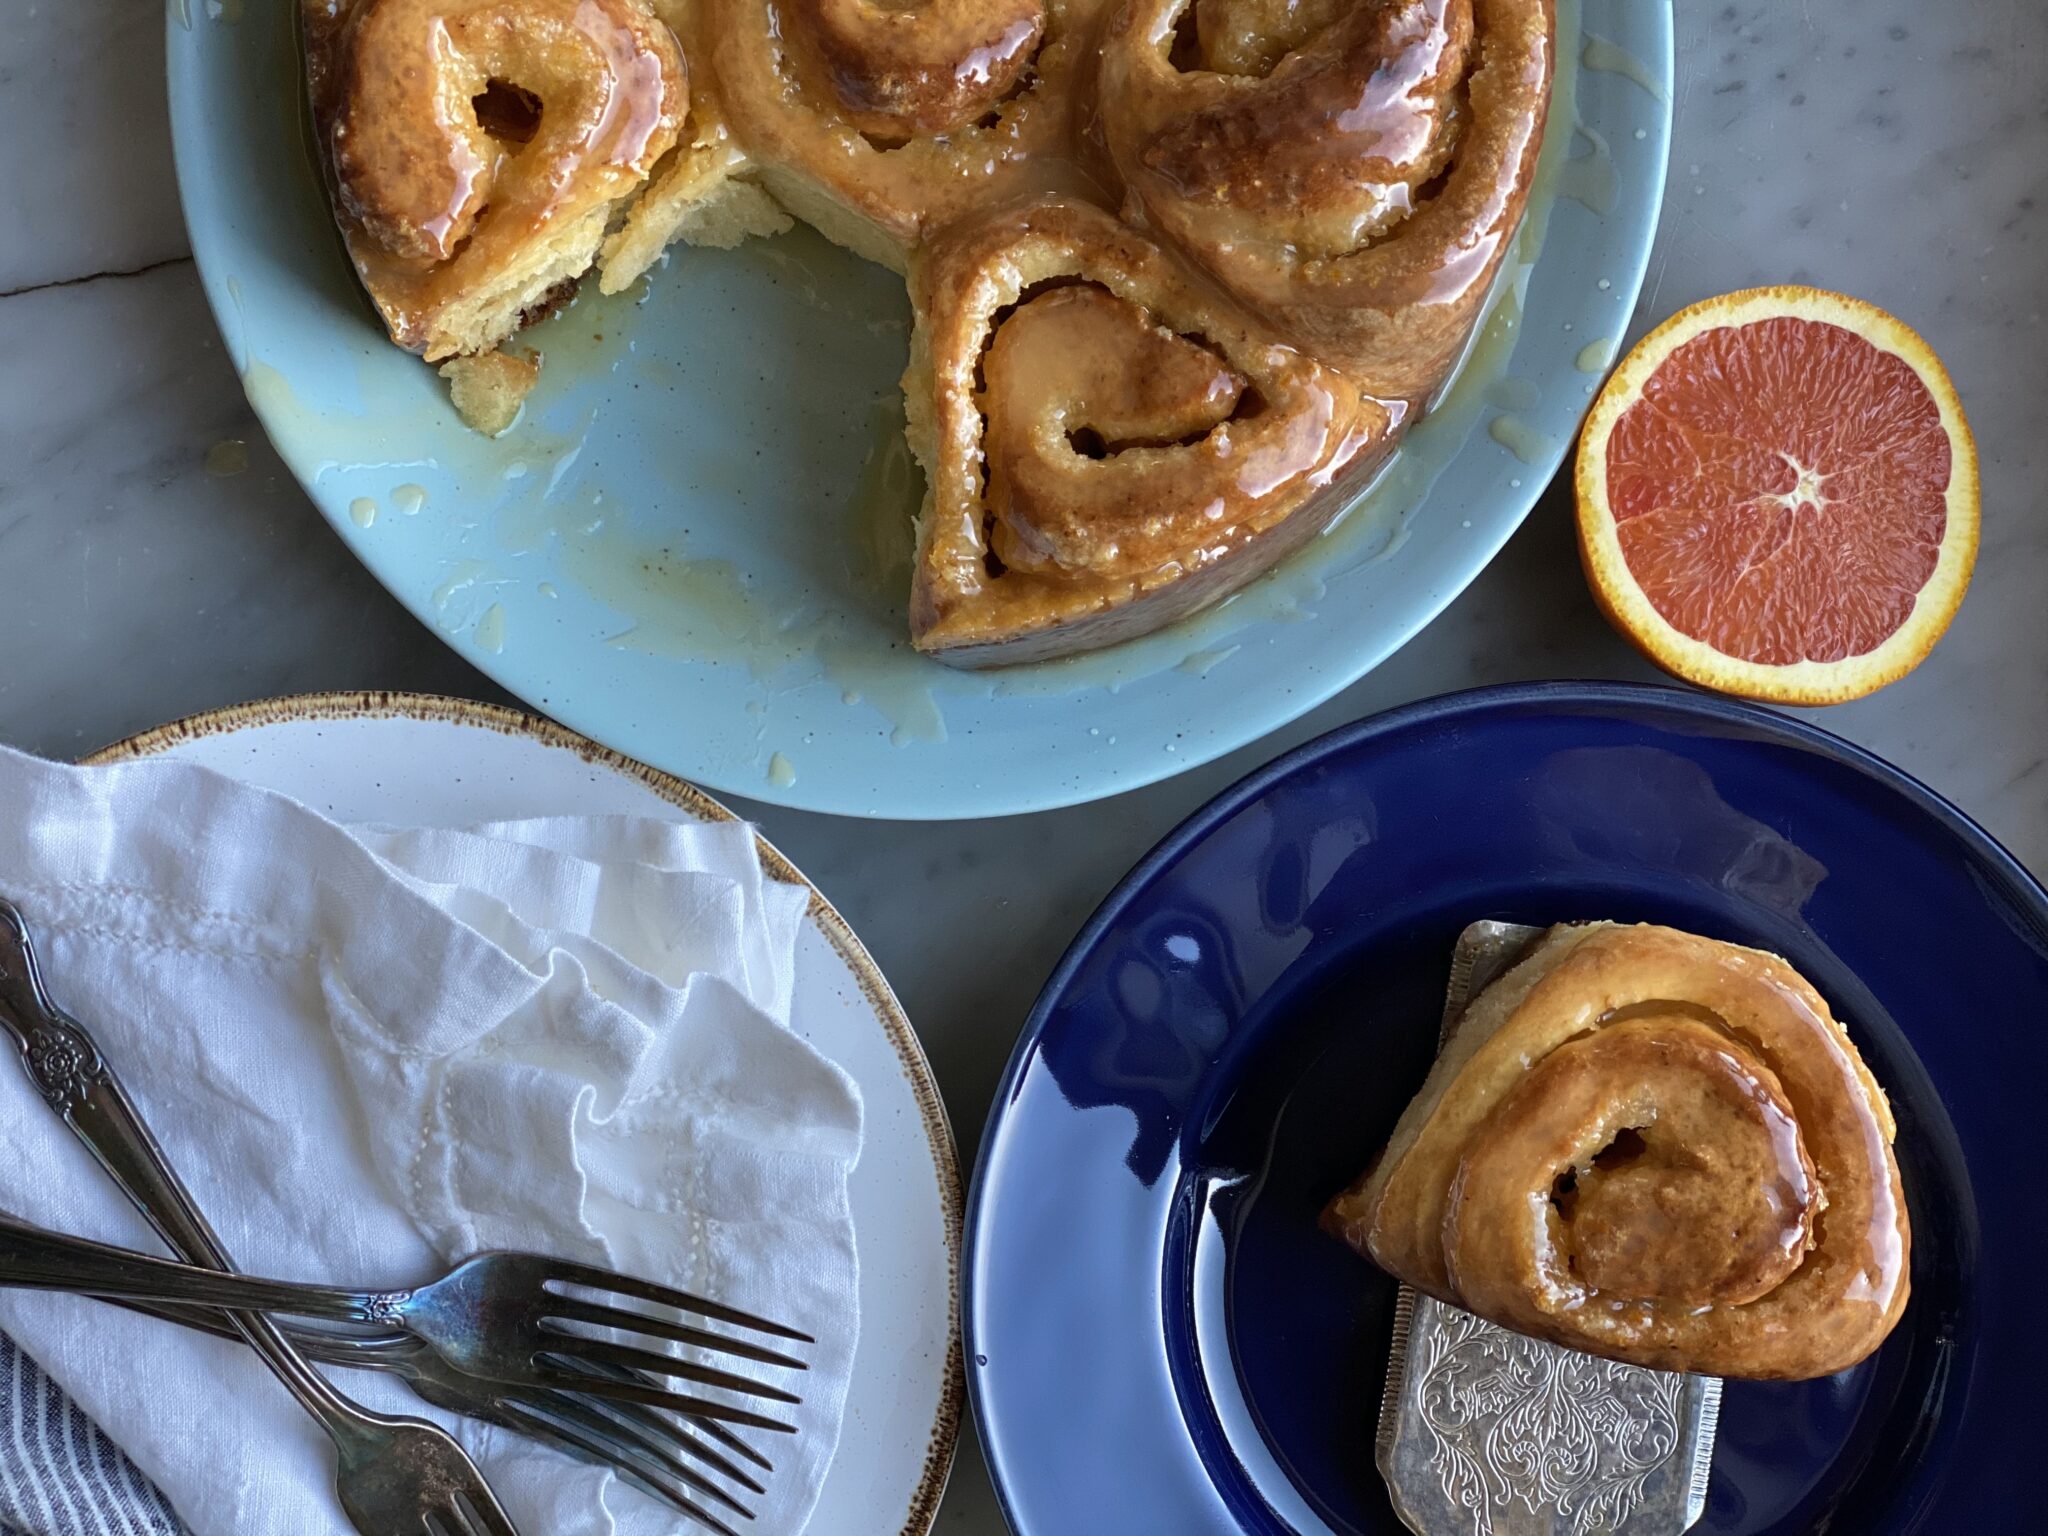 orange rolls on a plate with one on another plate with 2 forks and napkins and an orange